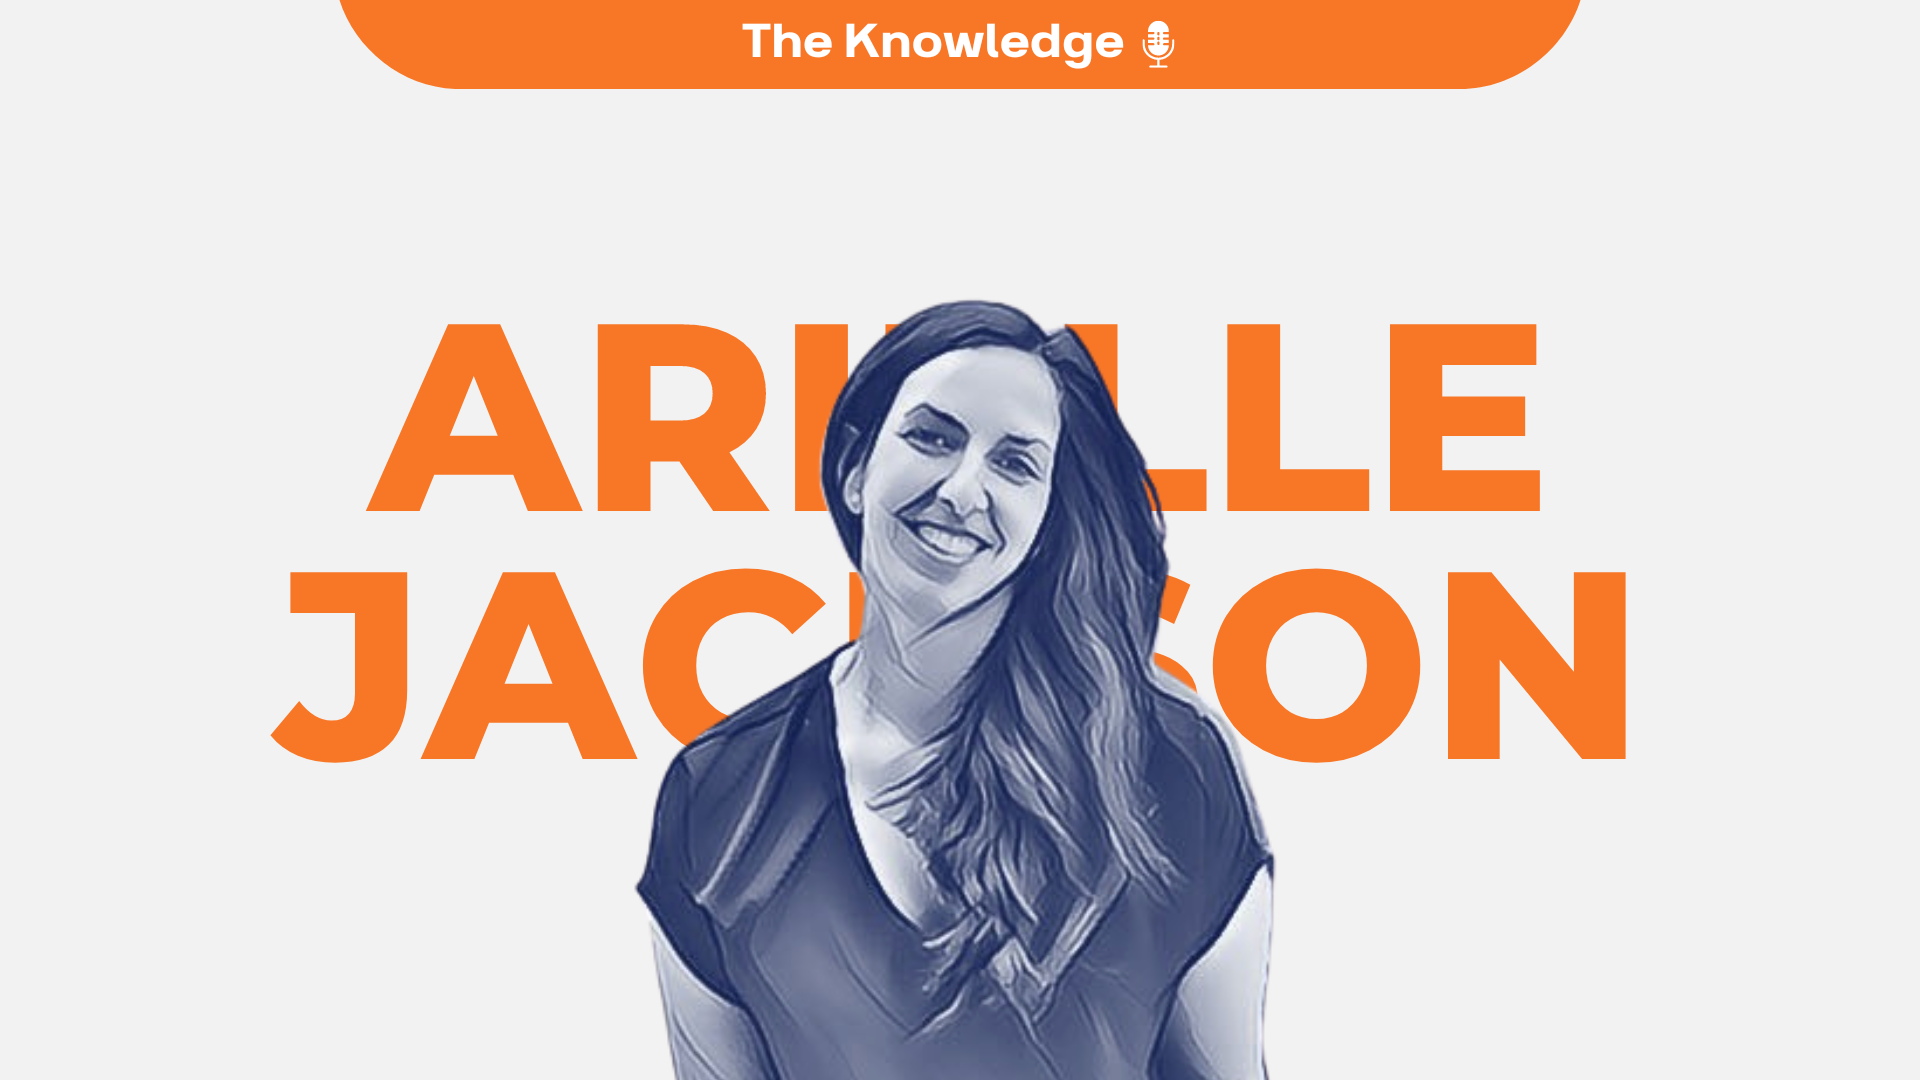 🎙 Making startups pop with Arielle Jackson